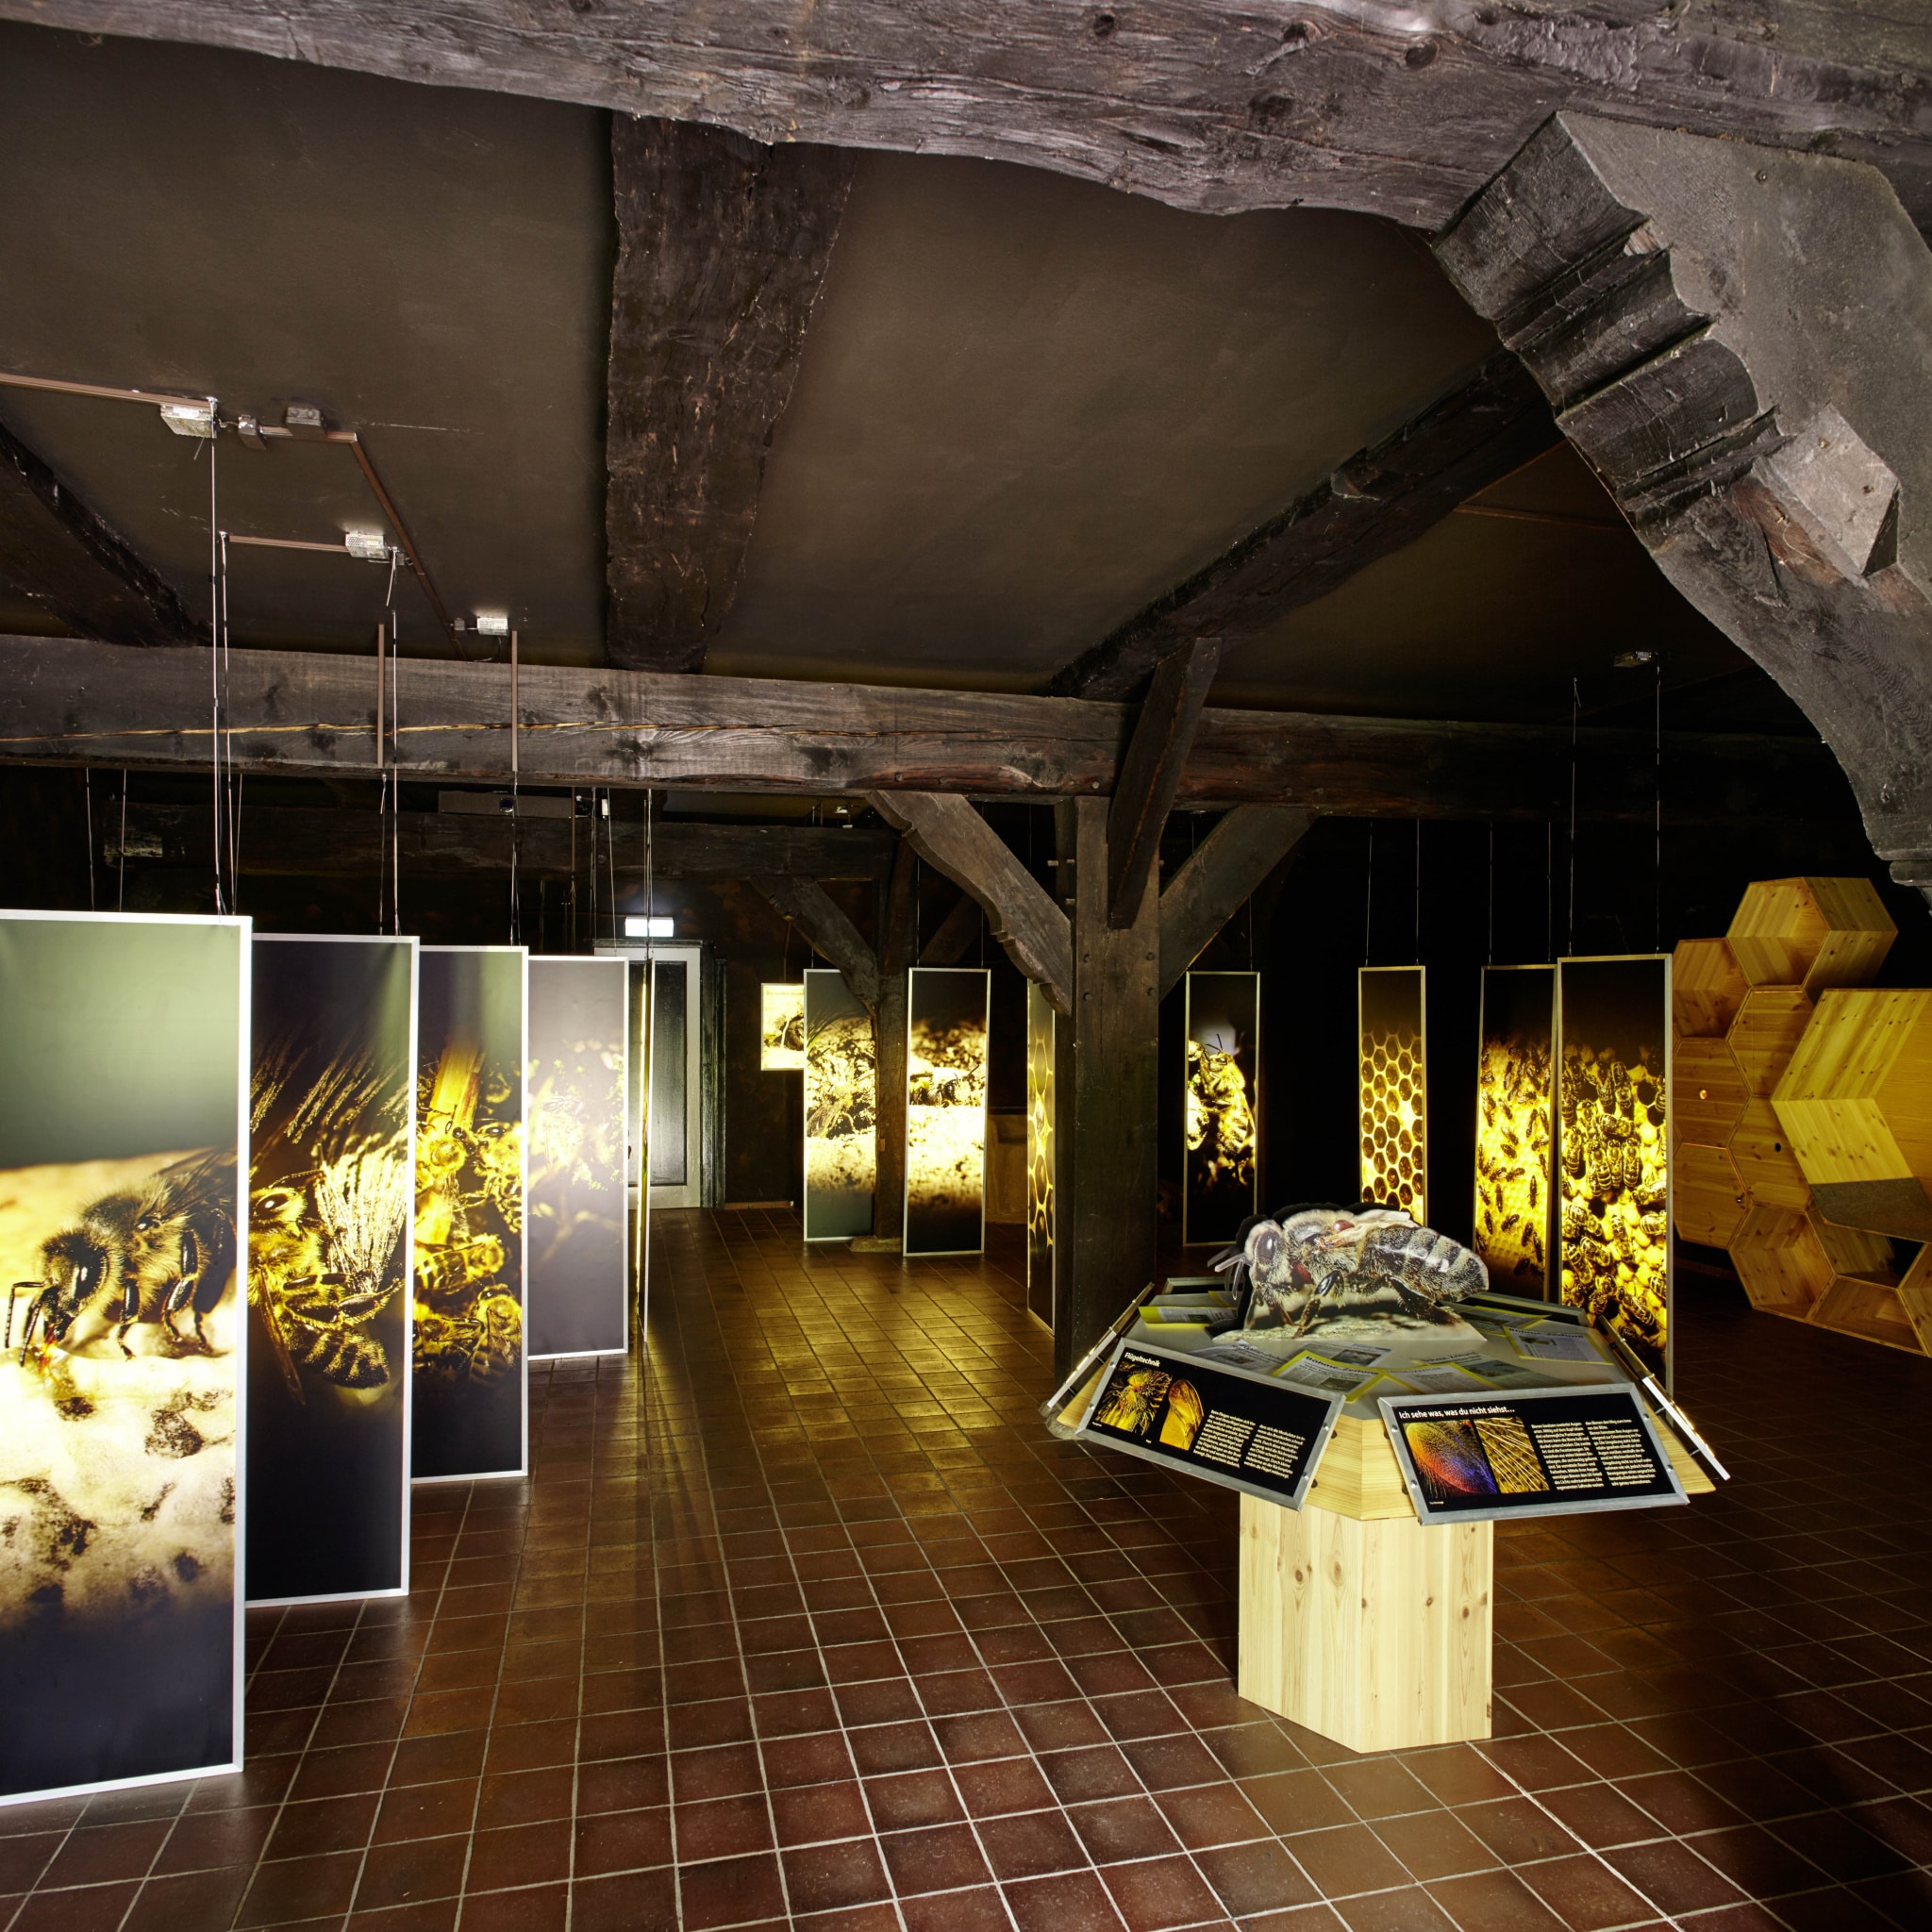 A view of the "Bienenwelten (Bee worlds)" exhibition in Niederhaverbeck | Photo: Christian Burmester